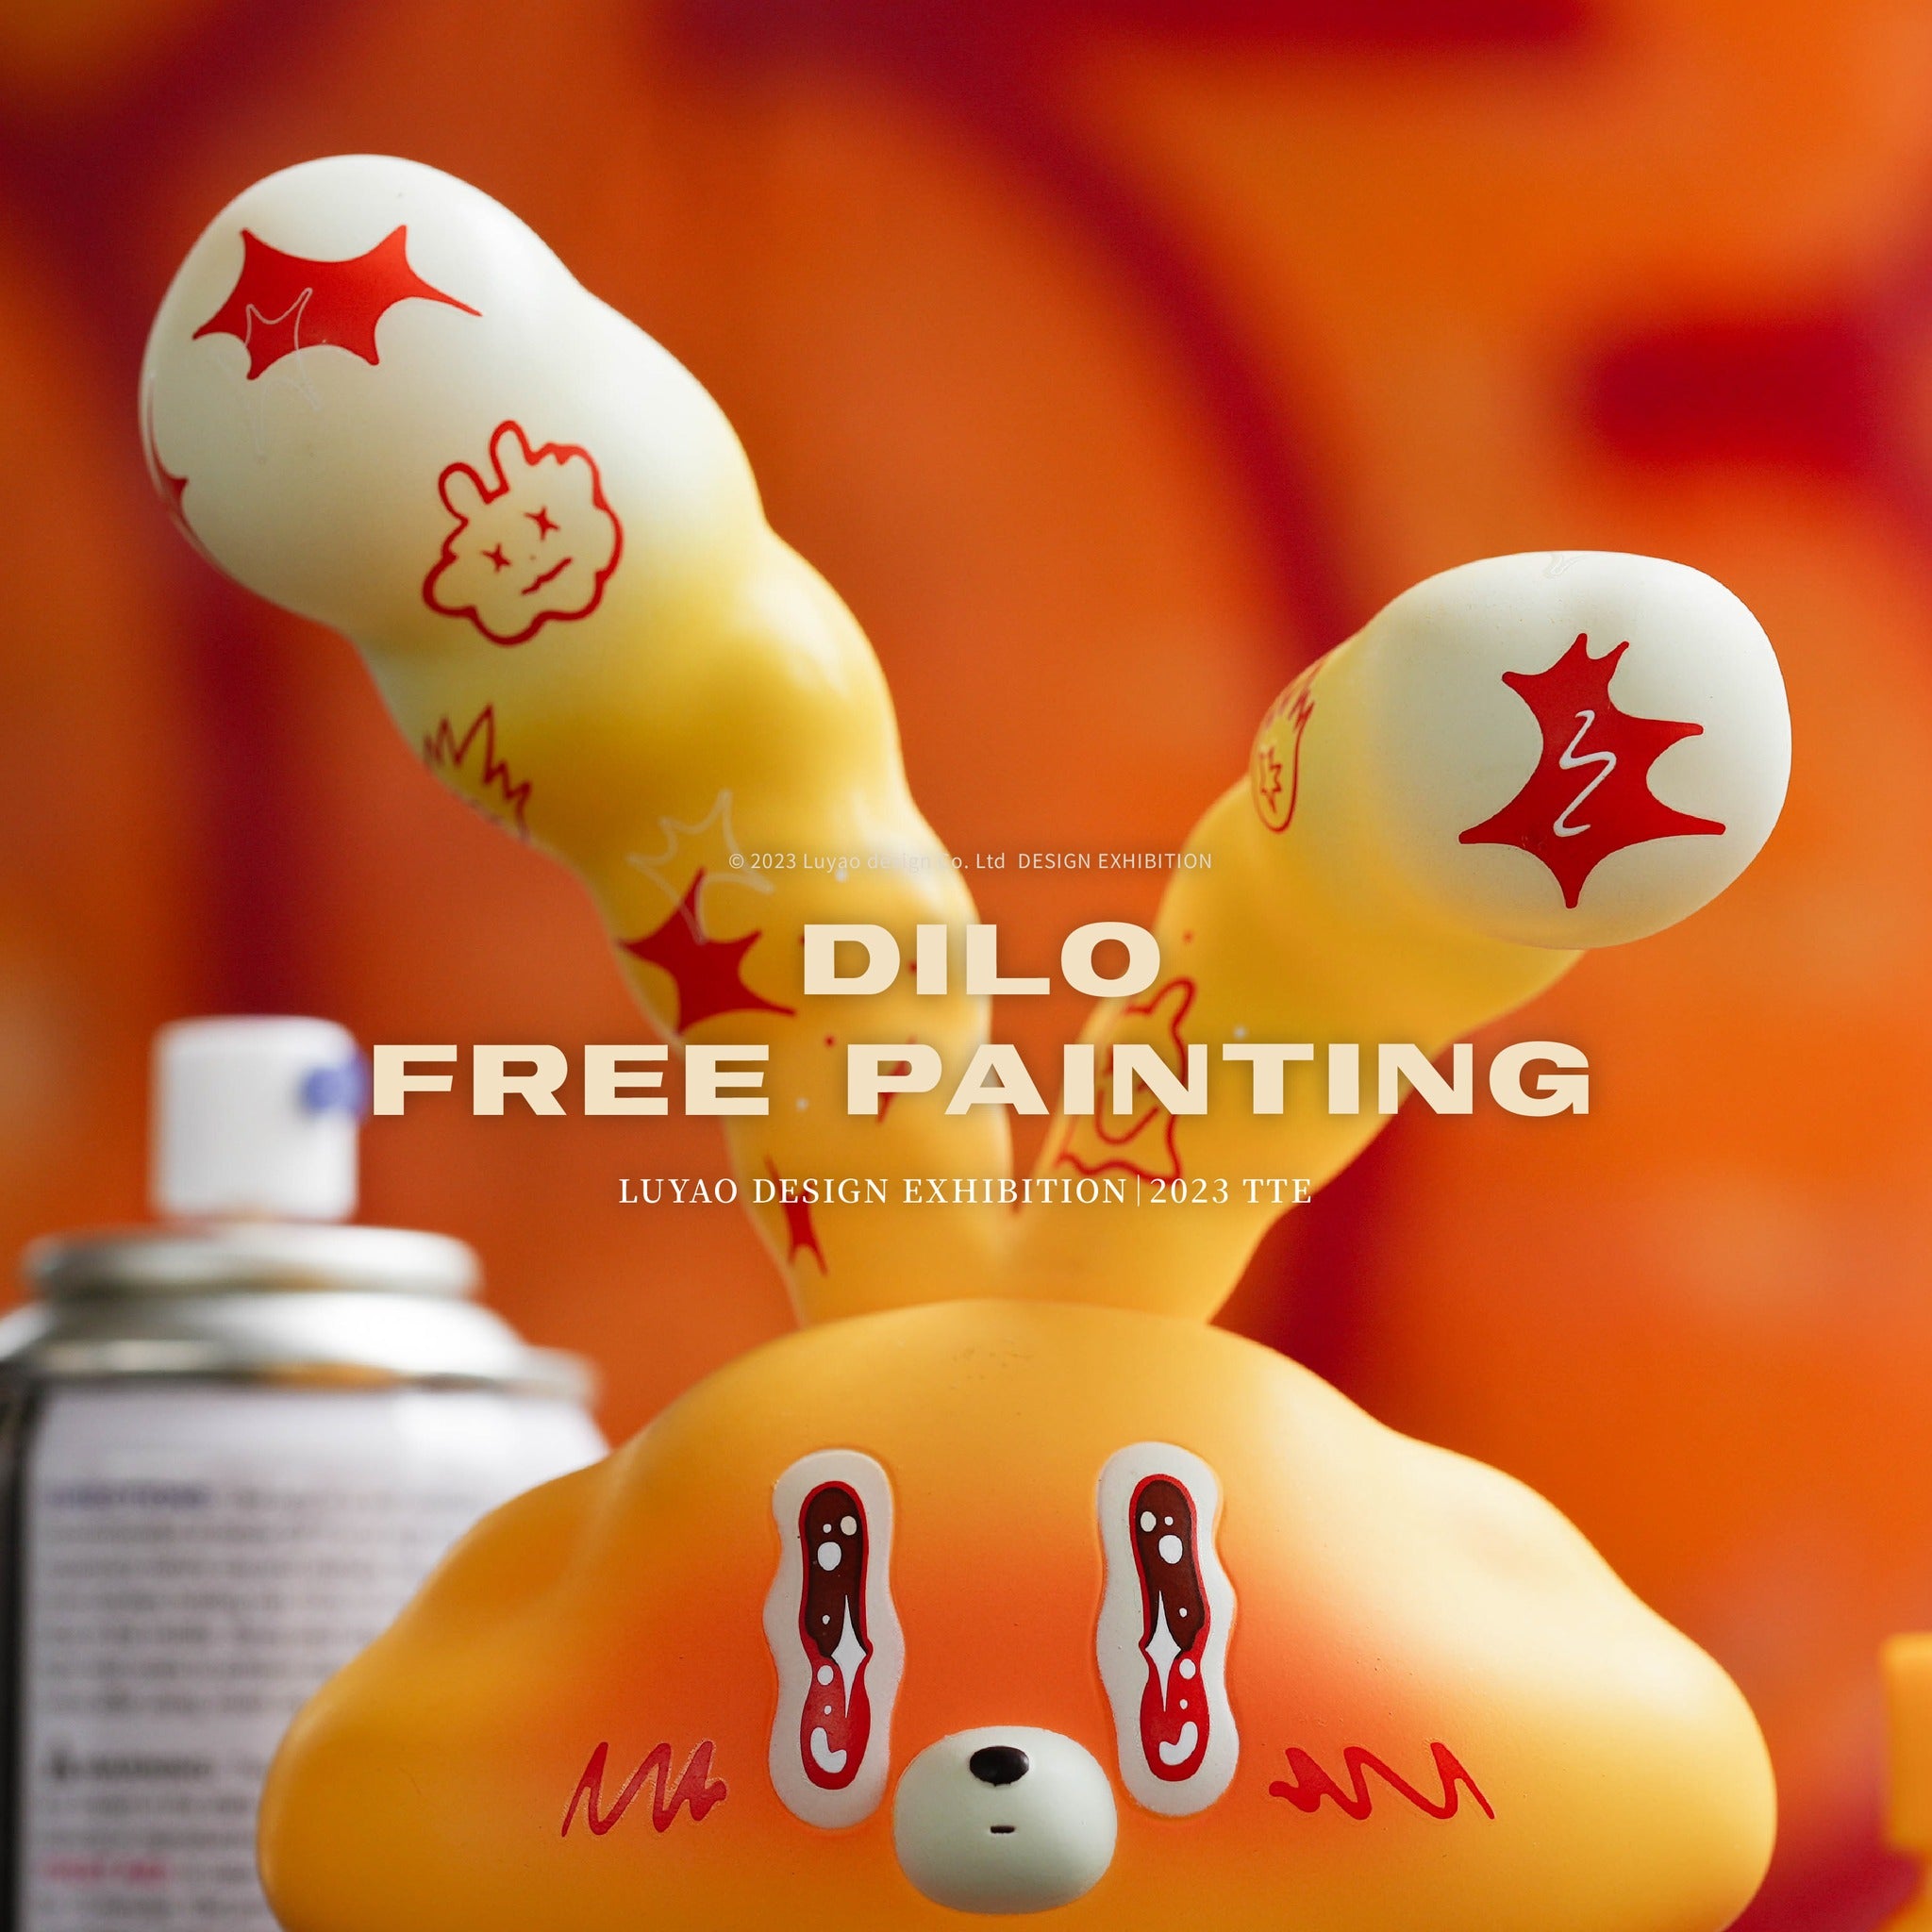 DILO-Free Painting